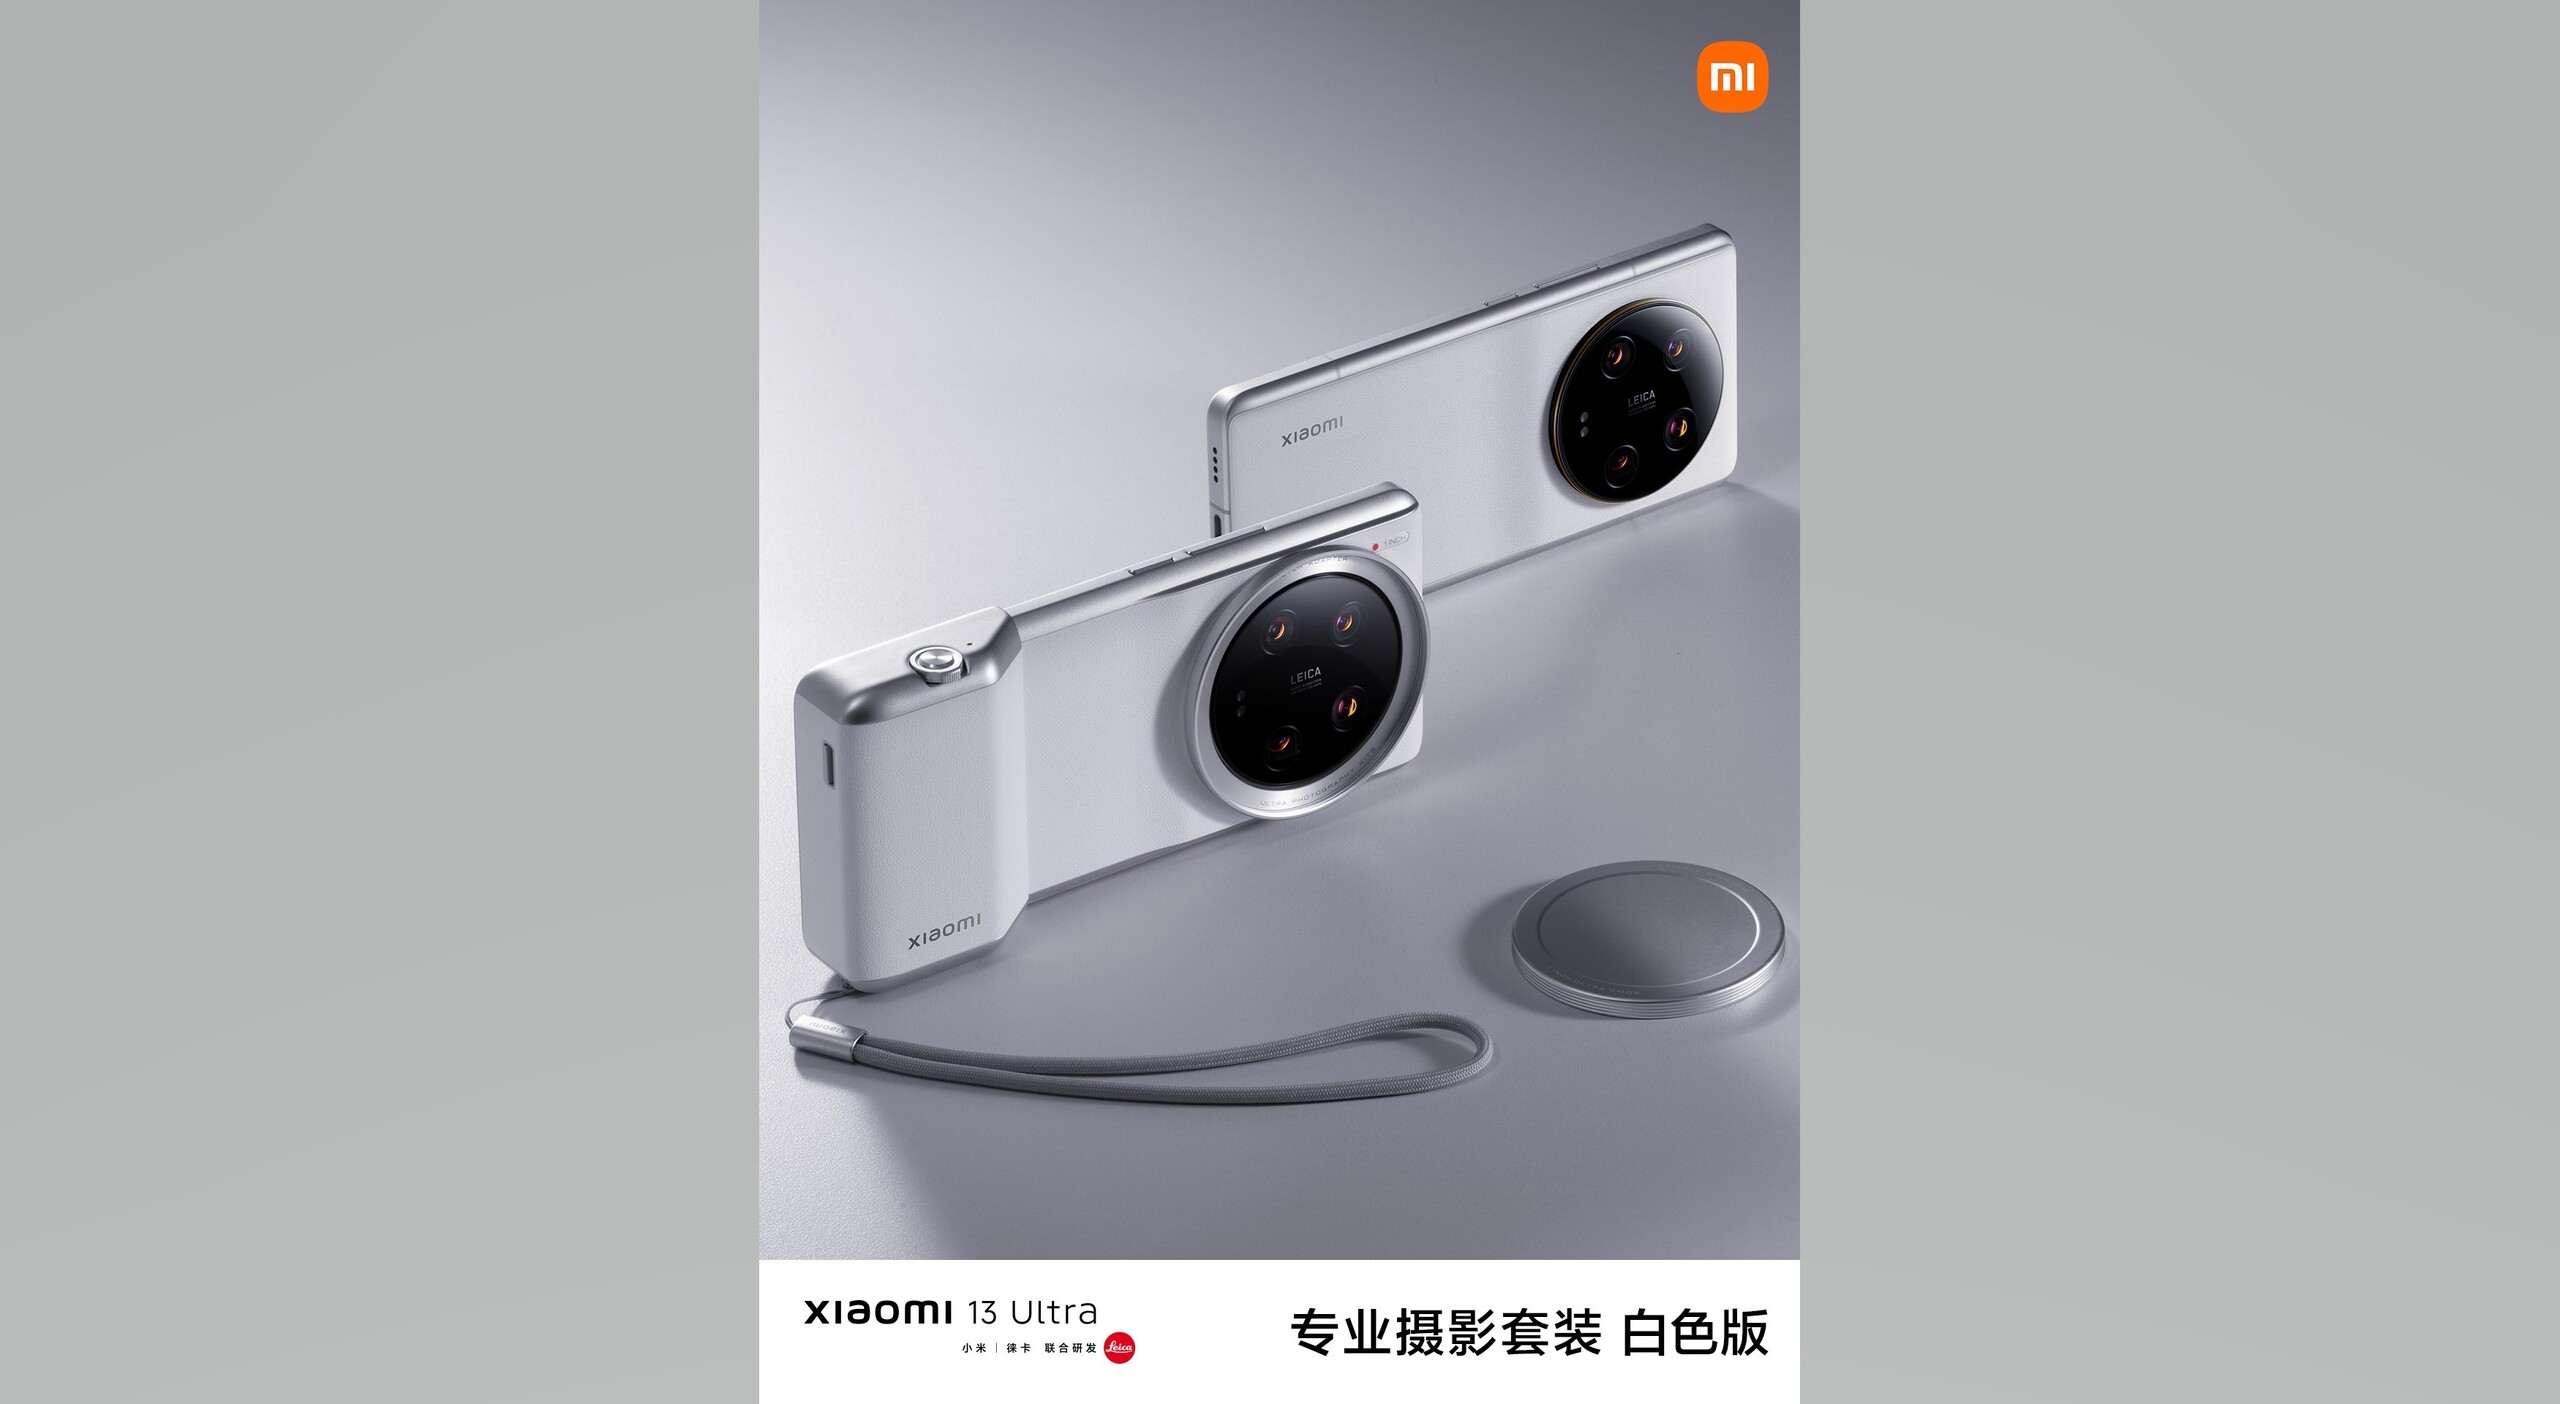 Xiaomi 14 design revealed ahead of launch -  news